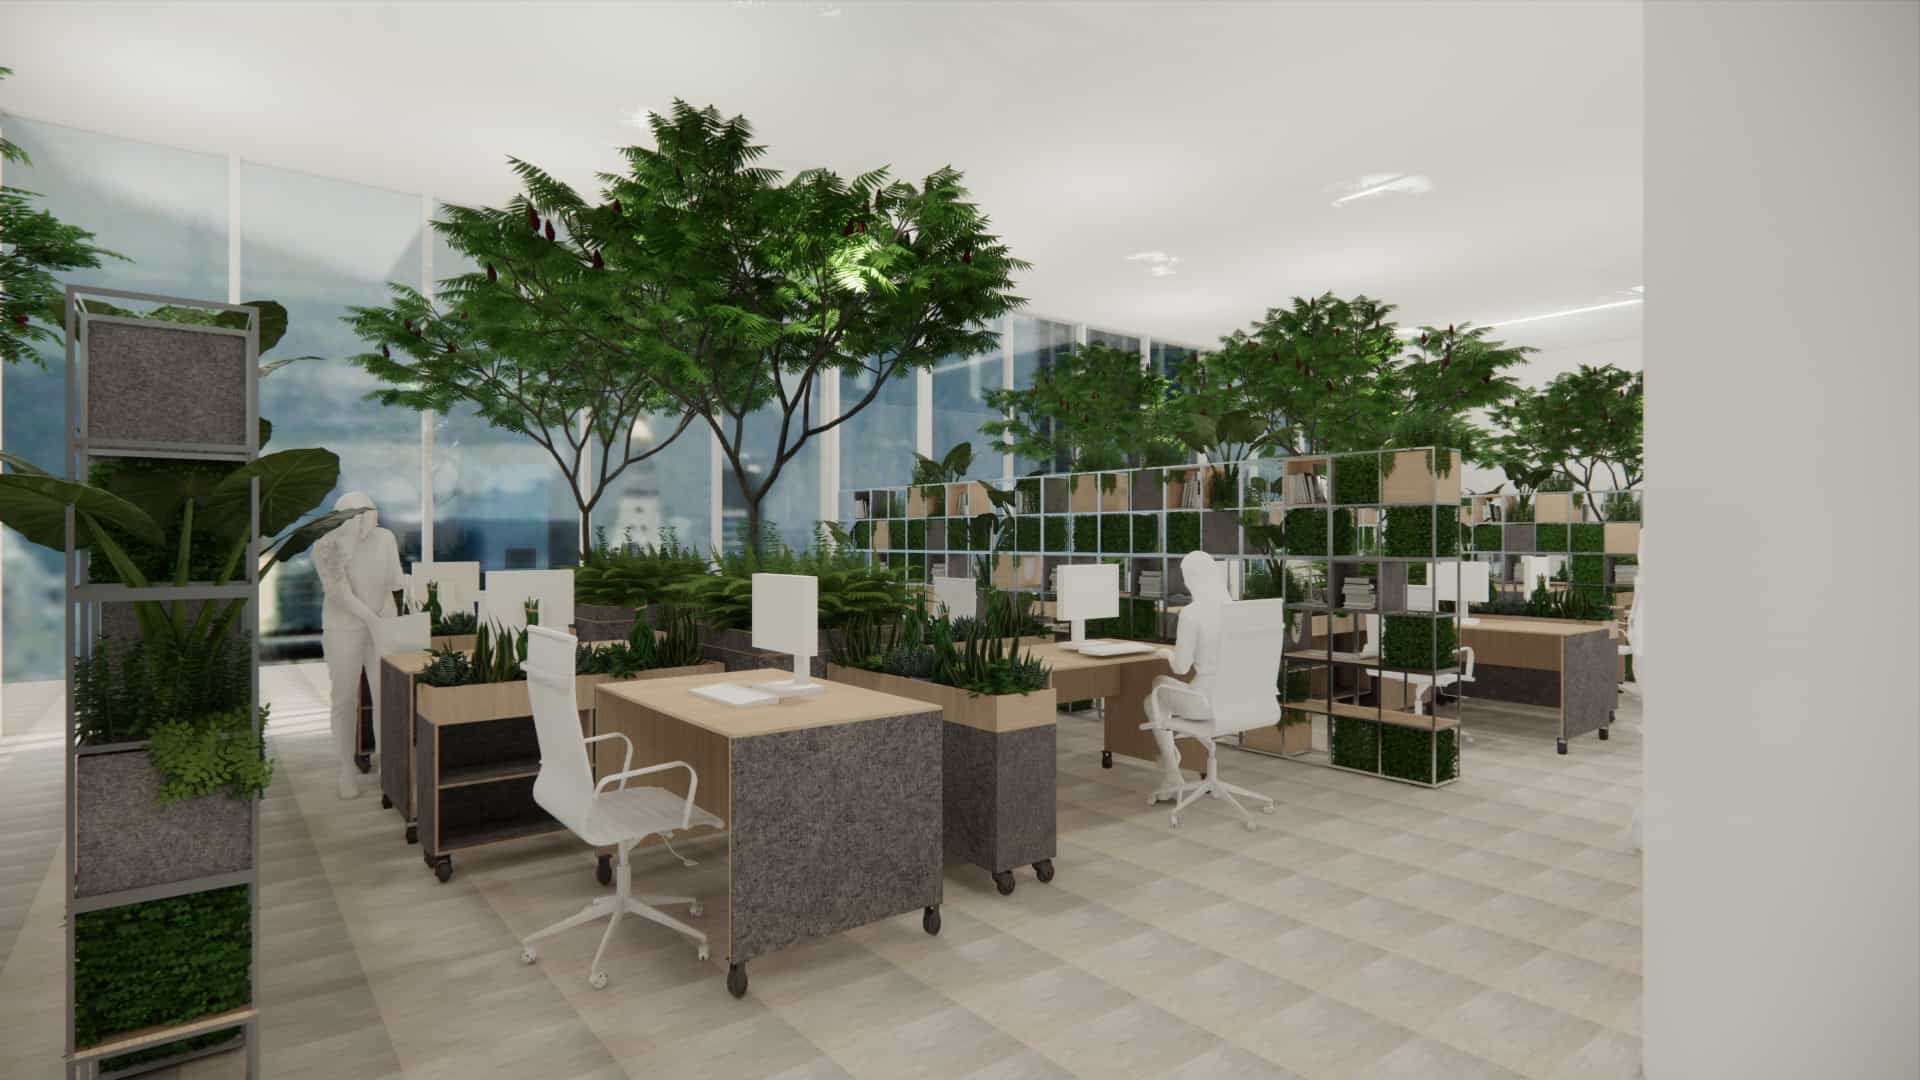 A 3D rendering of an office with plants and desks, showcasing a science-backed method to improve productivity.